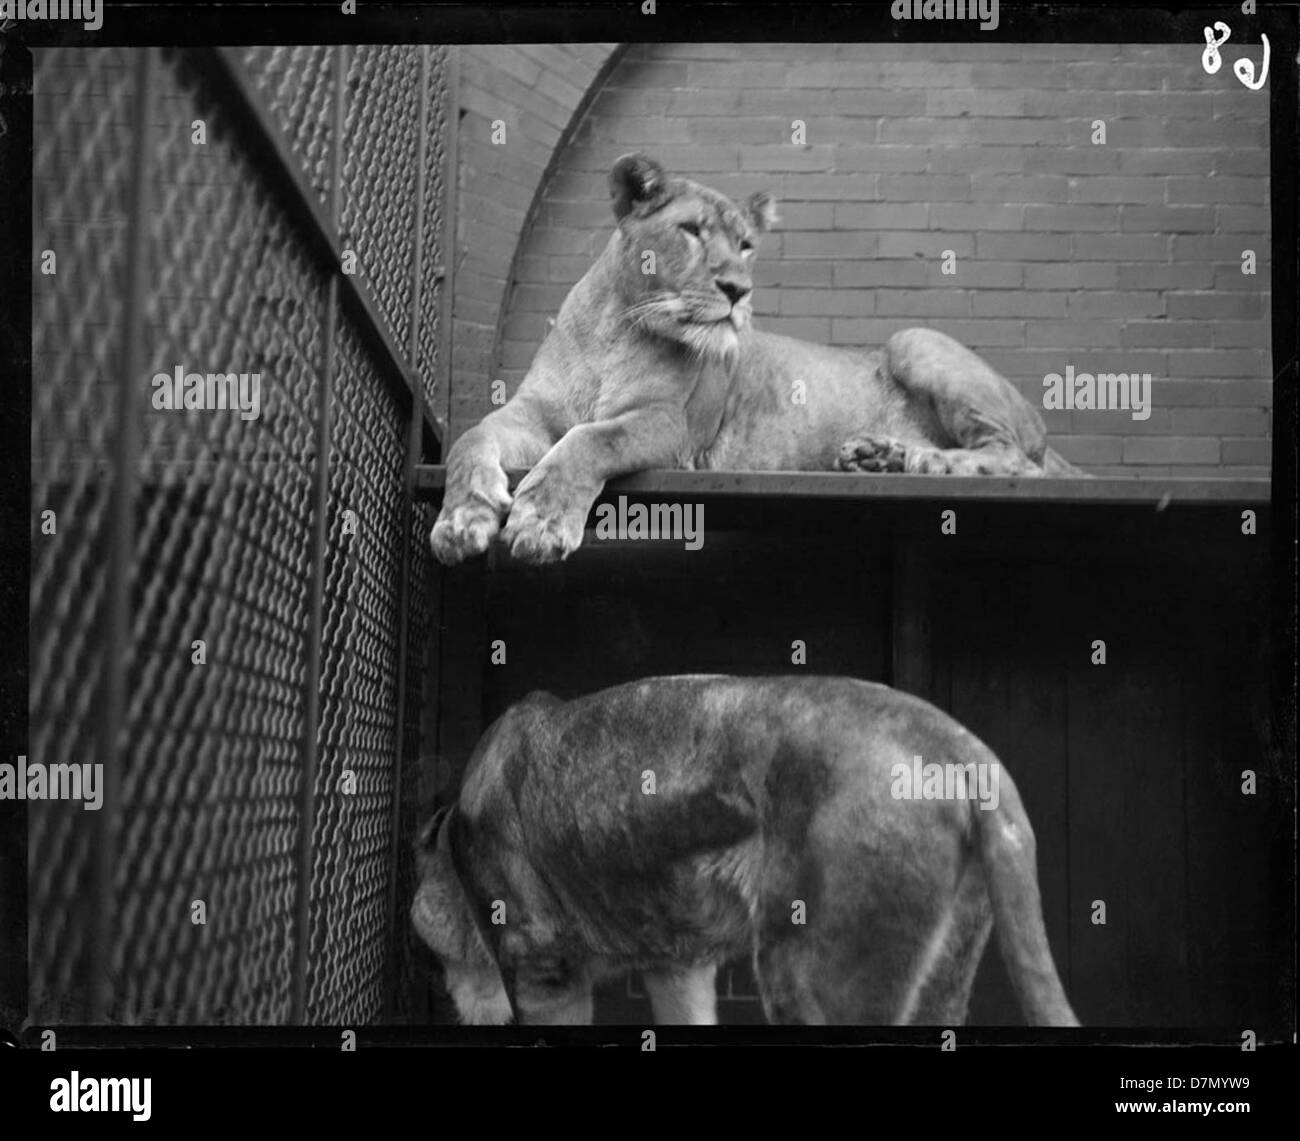 Zoo lion cage Black and White Stock Photos & Images - Alamy